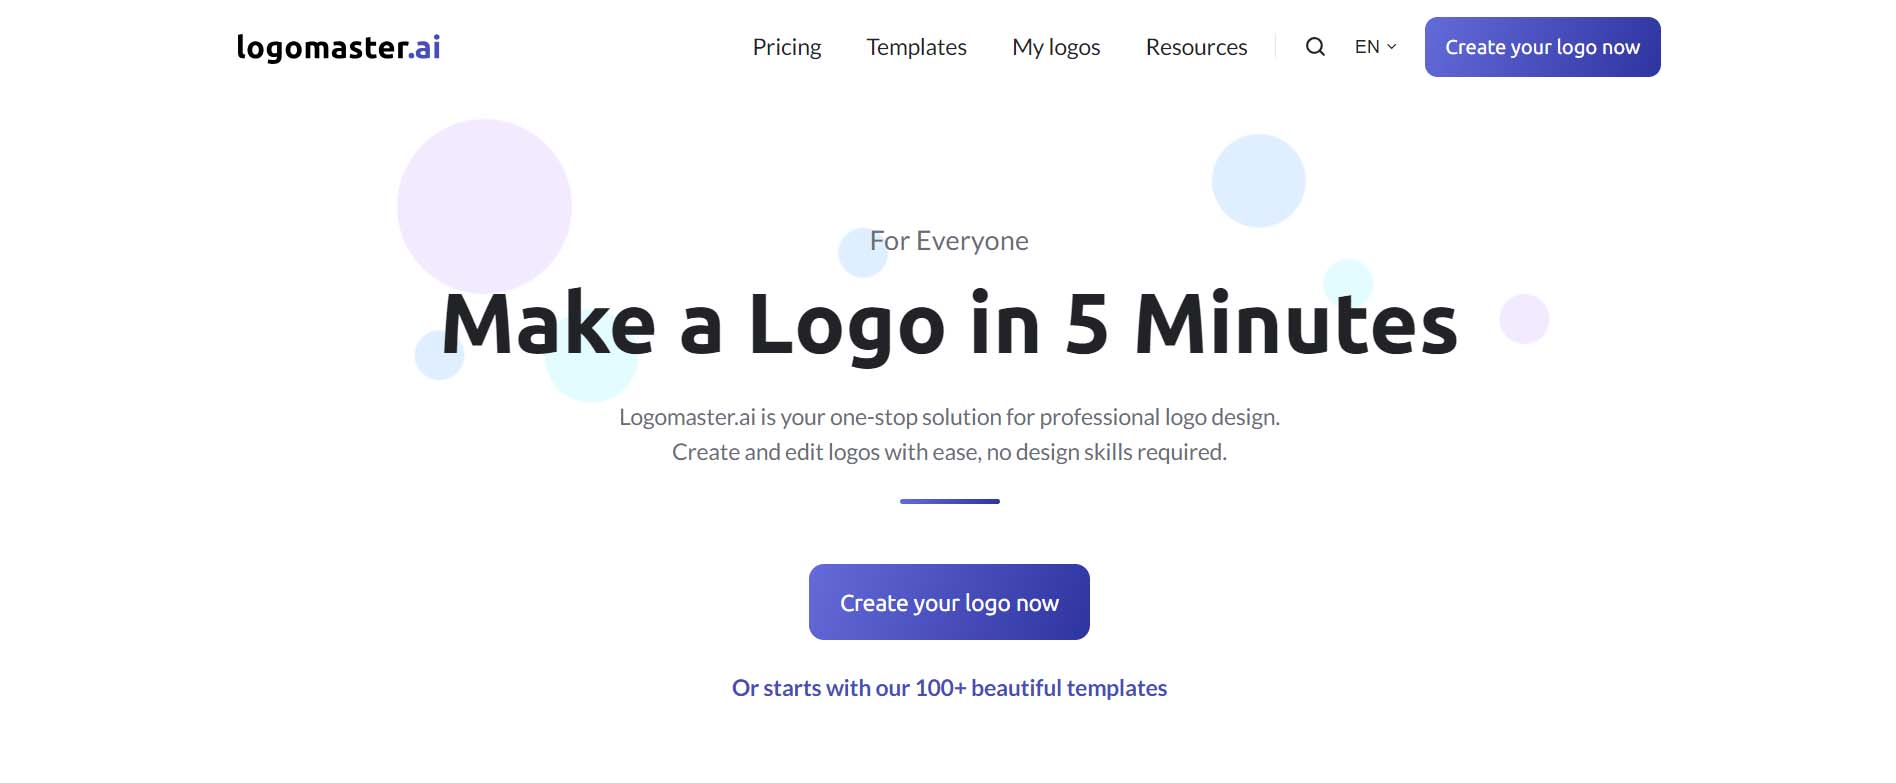 Watch Brand Logo designs, themes, templates and downloadable